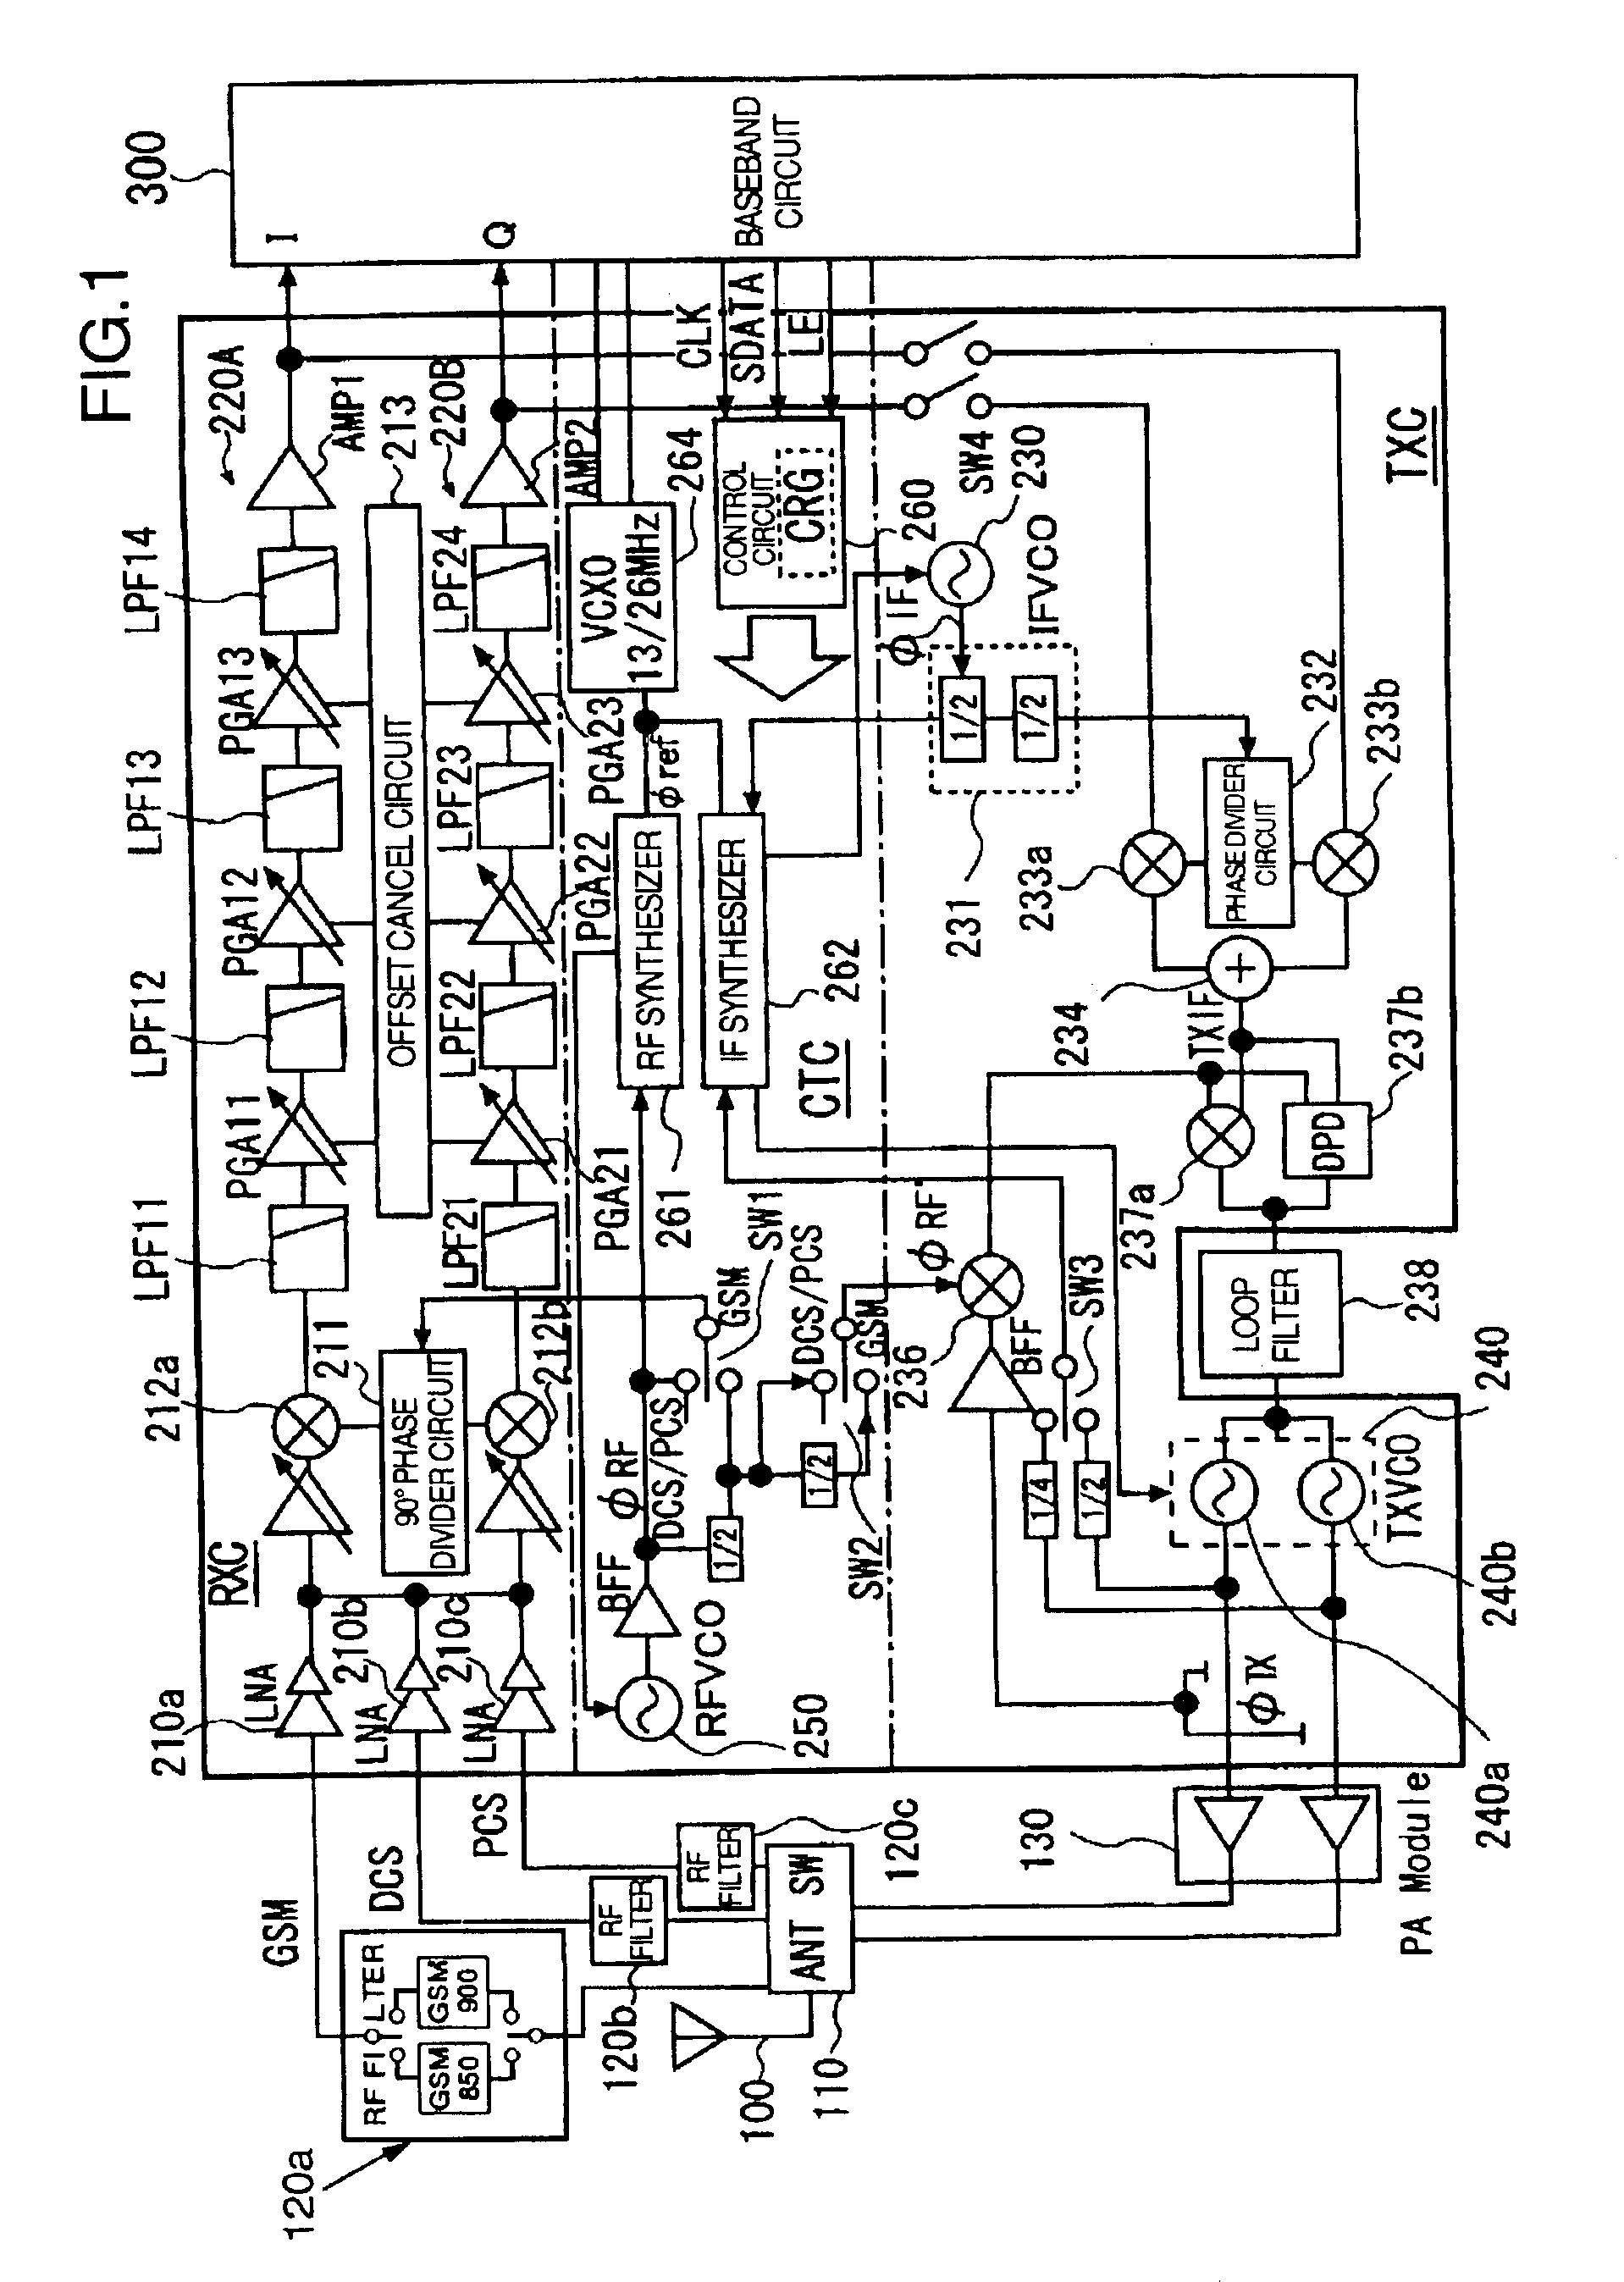 Communication semiconductor integrated circuit and radio communication system